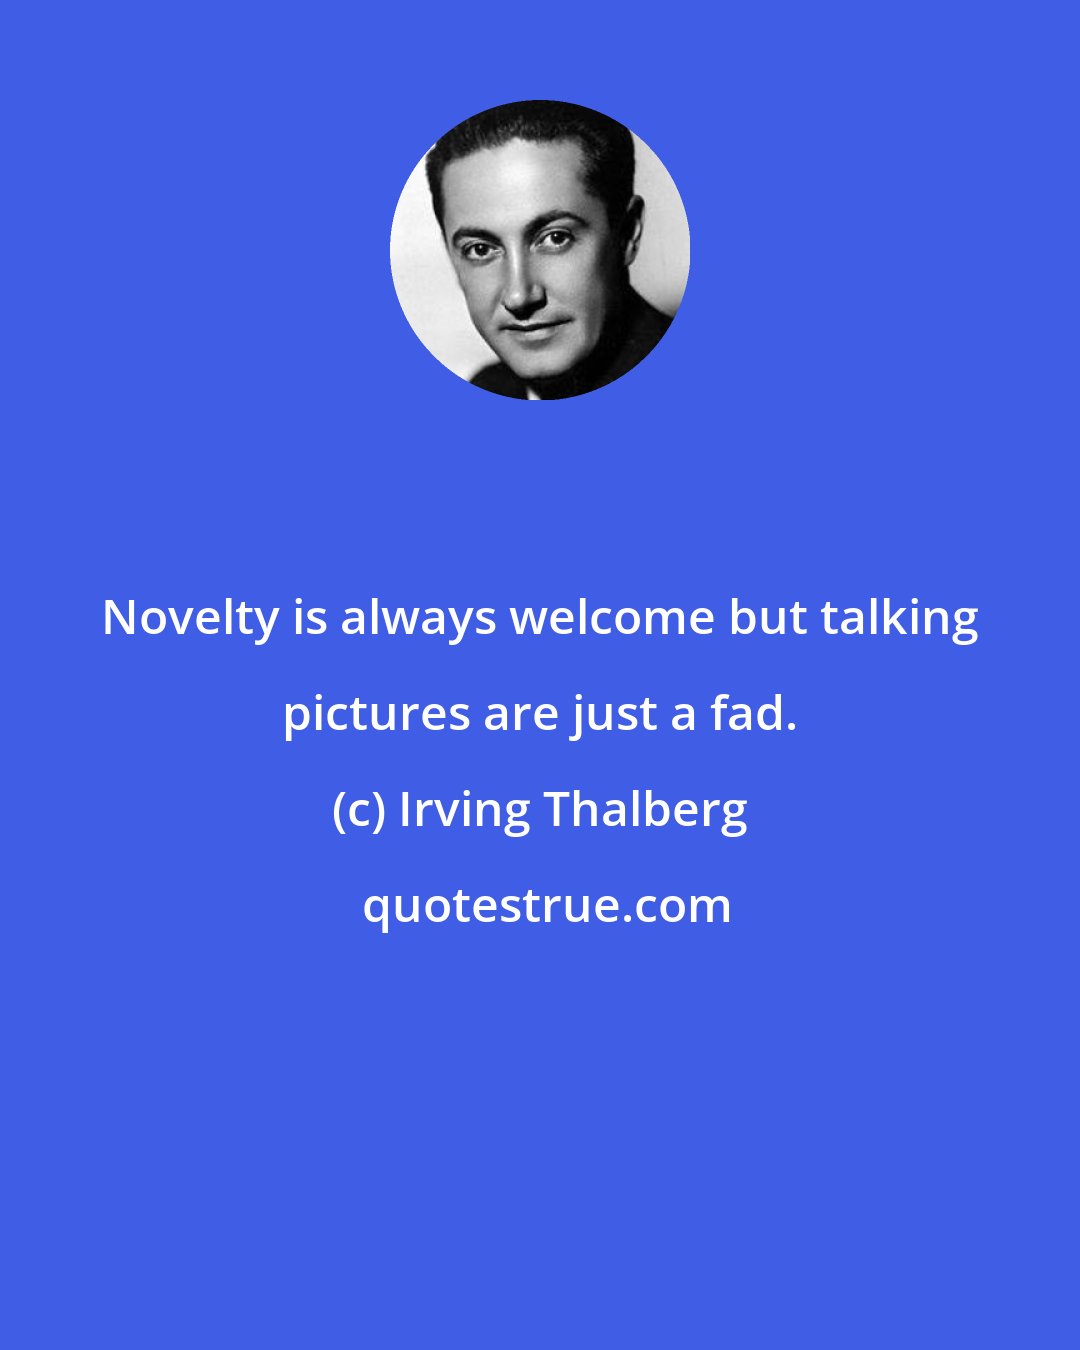 Irving Thalberg: Novelty is always welcome but talking pictures are just a fad.